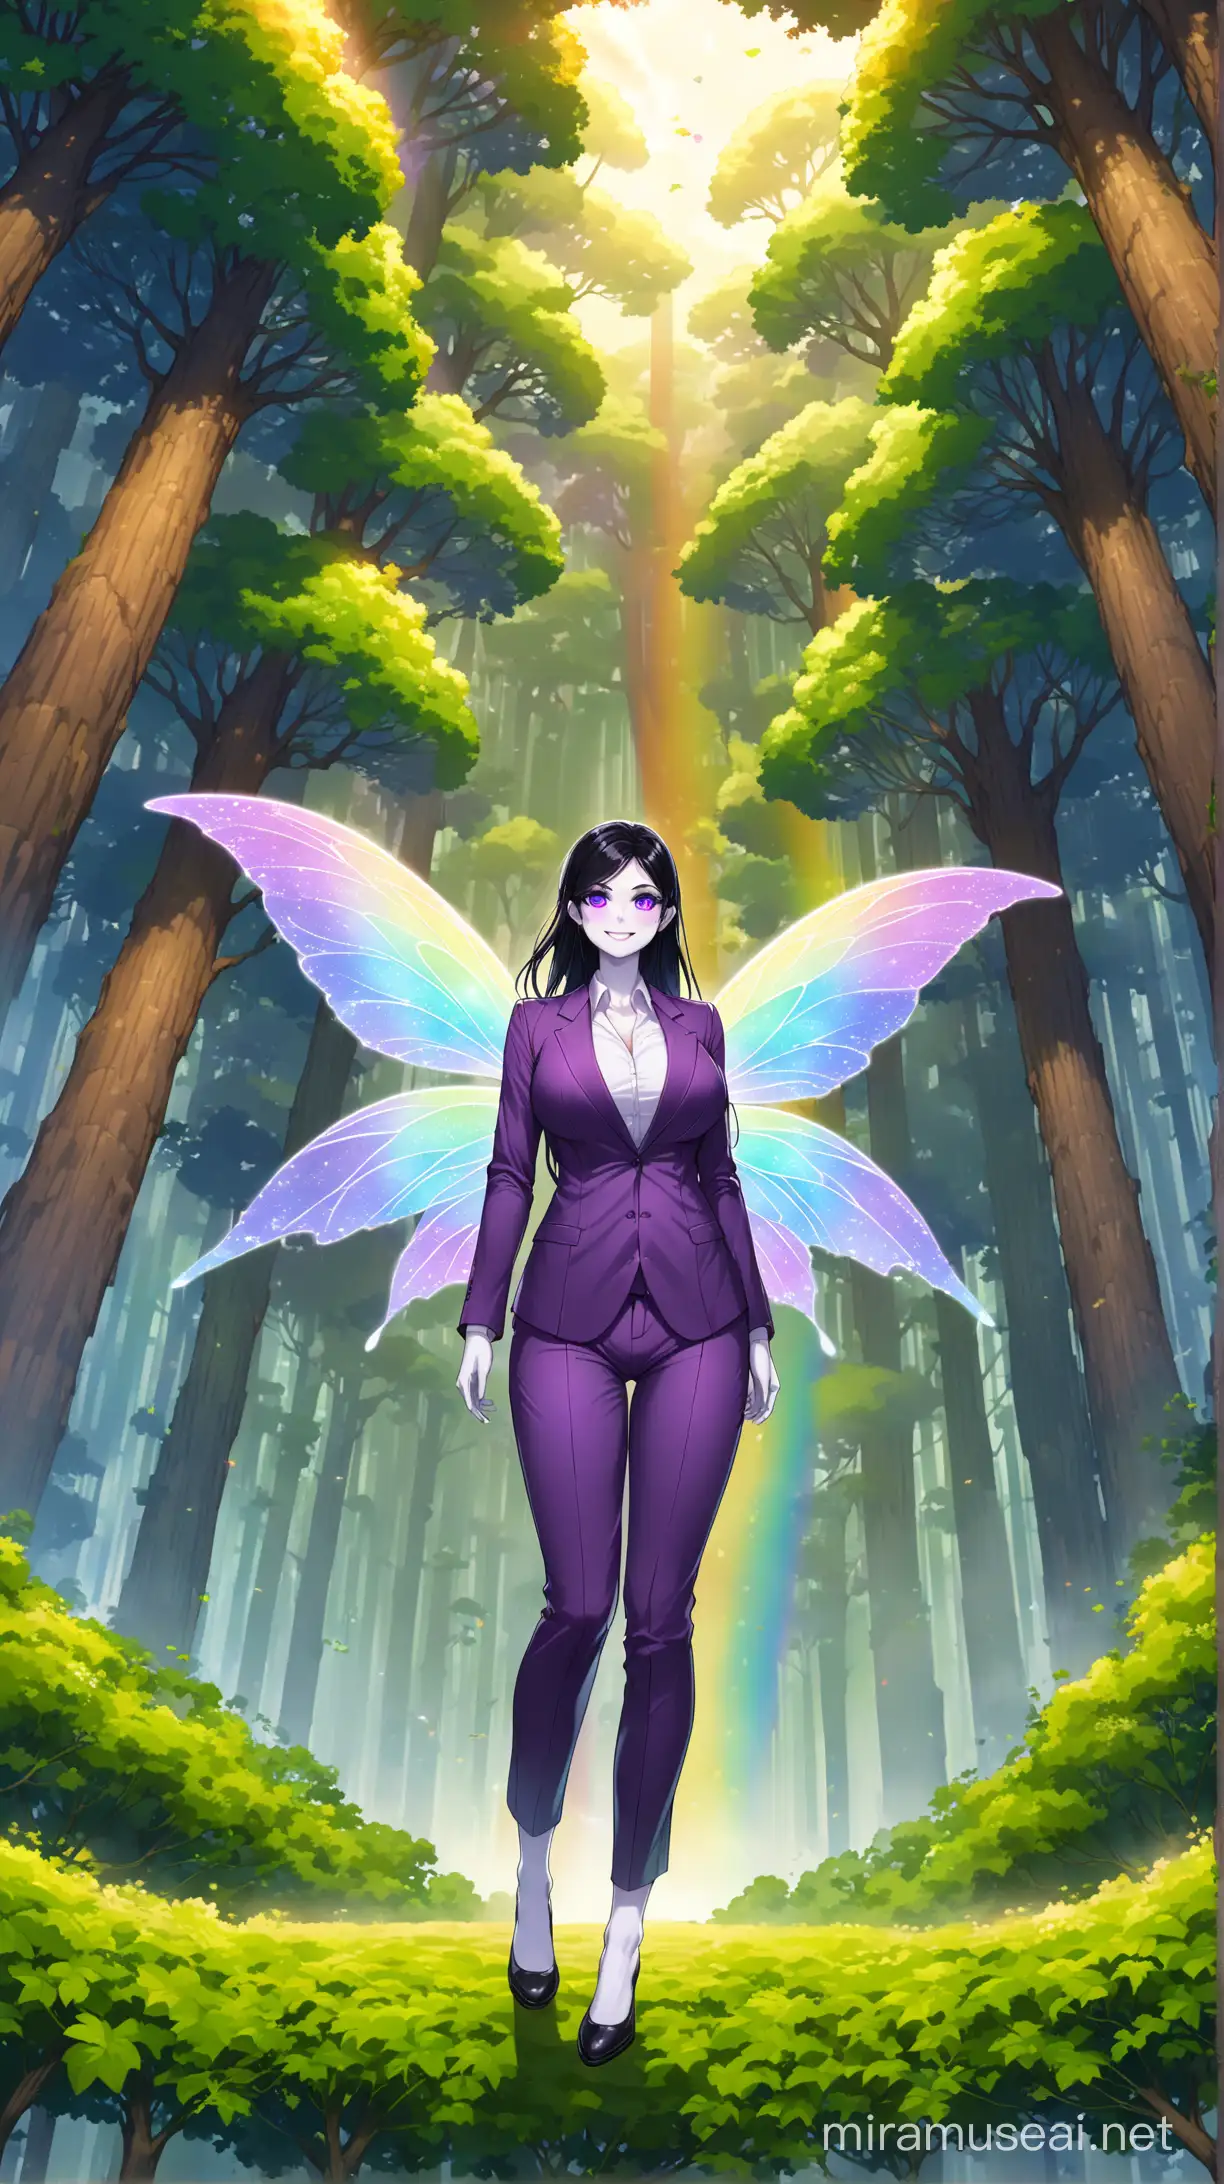 Enchanting Giantess Fairy in Purple Business Suit Amidst Towering Forest